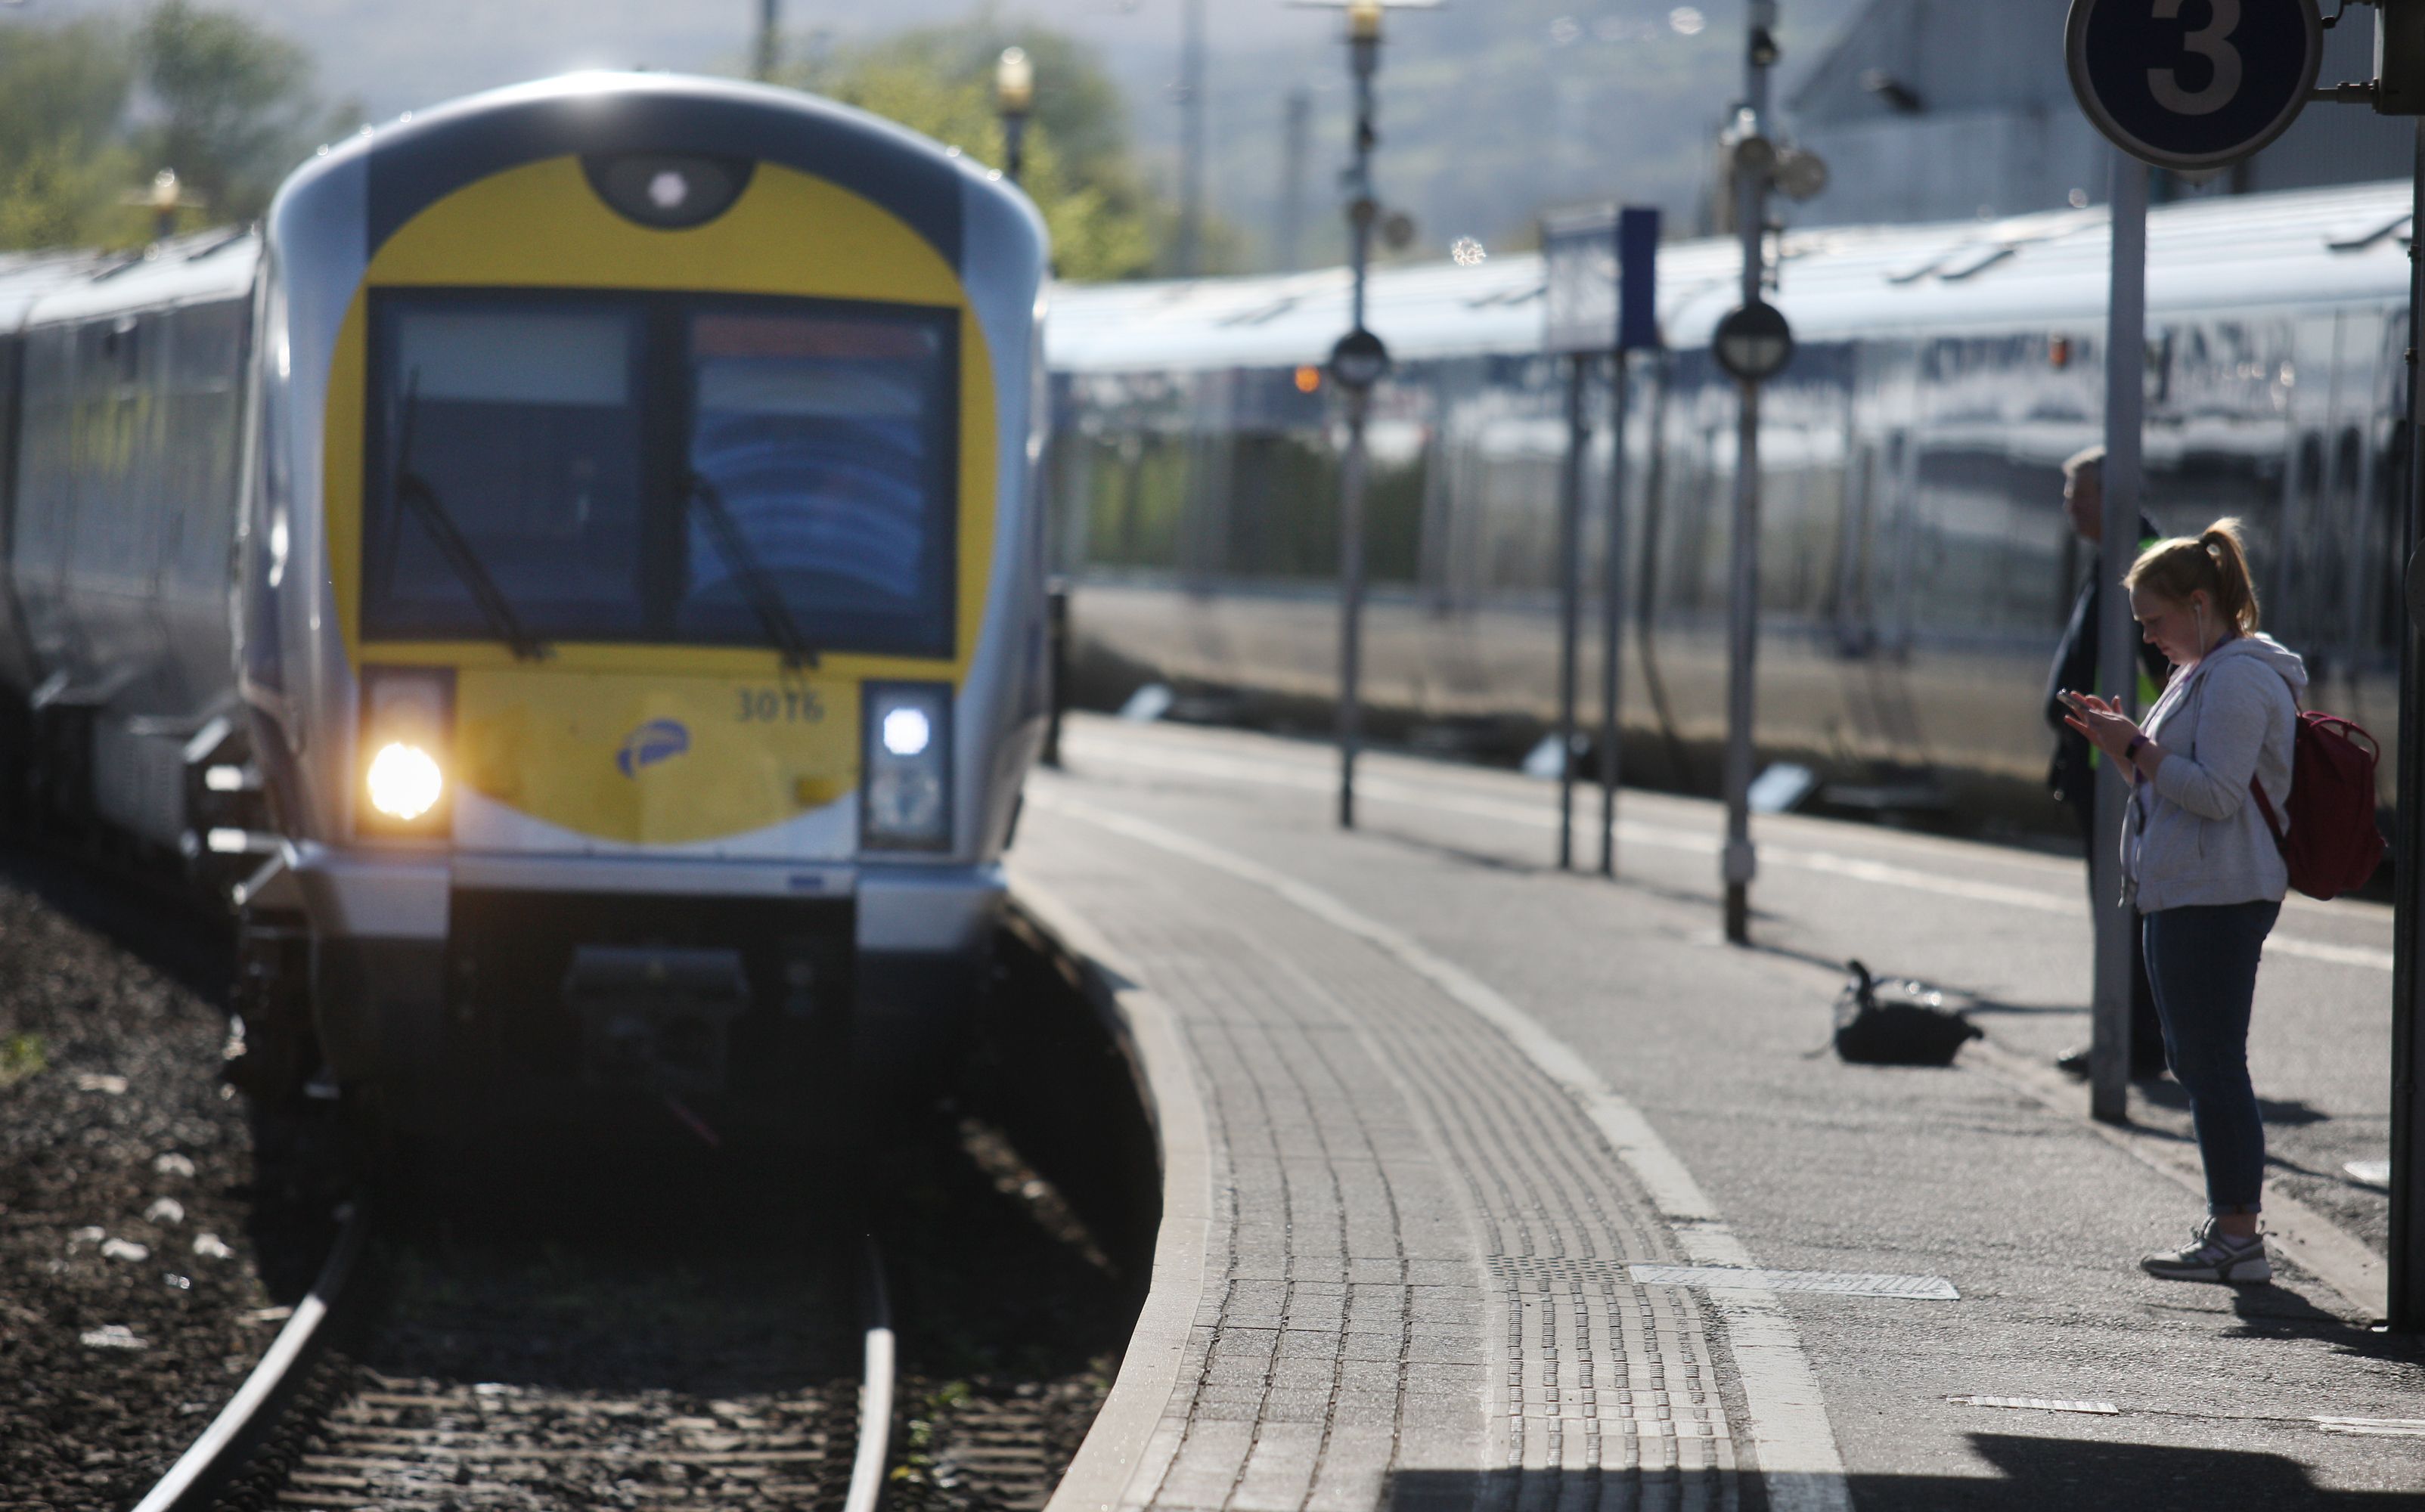 ON TIME: The new hourly service from Dublin to Belfast is hoping to run from 2025